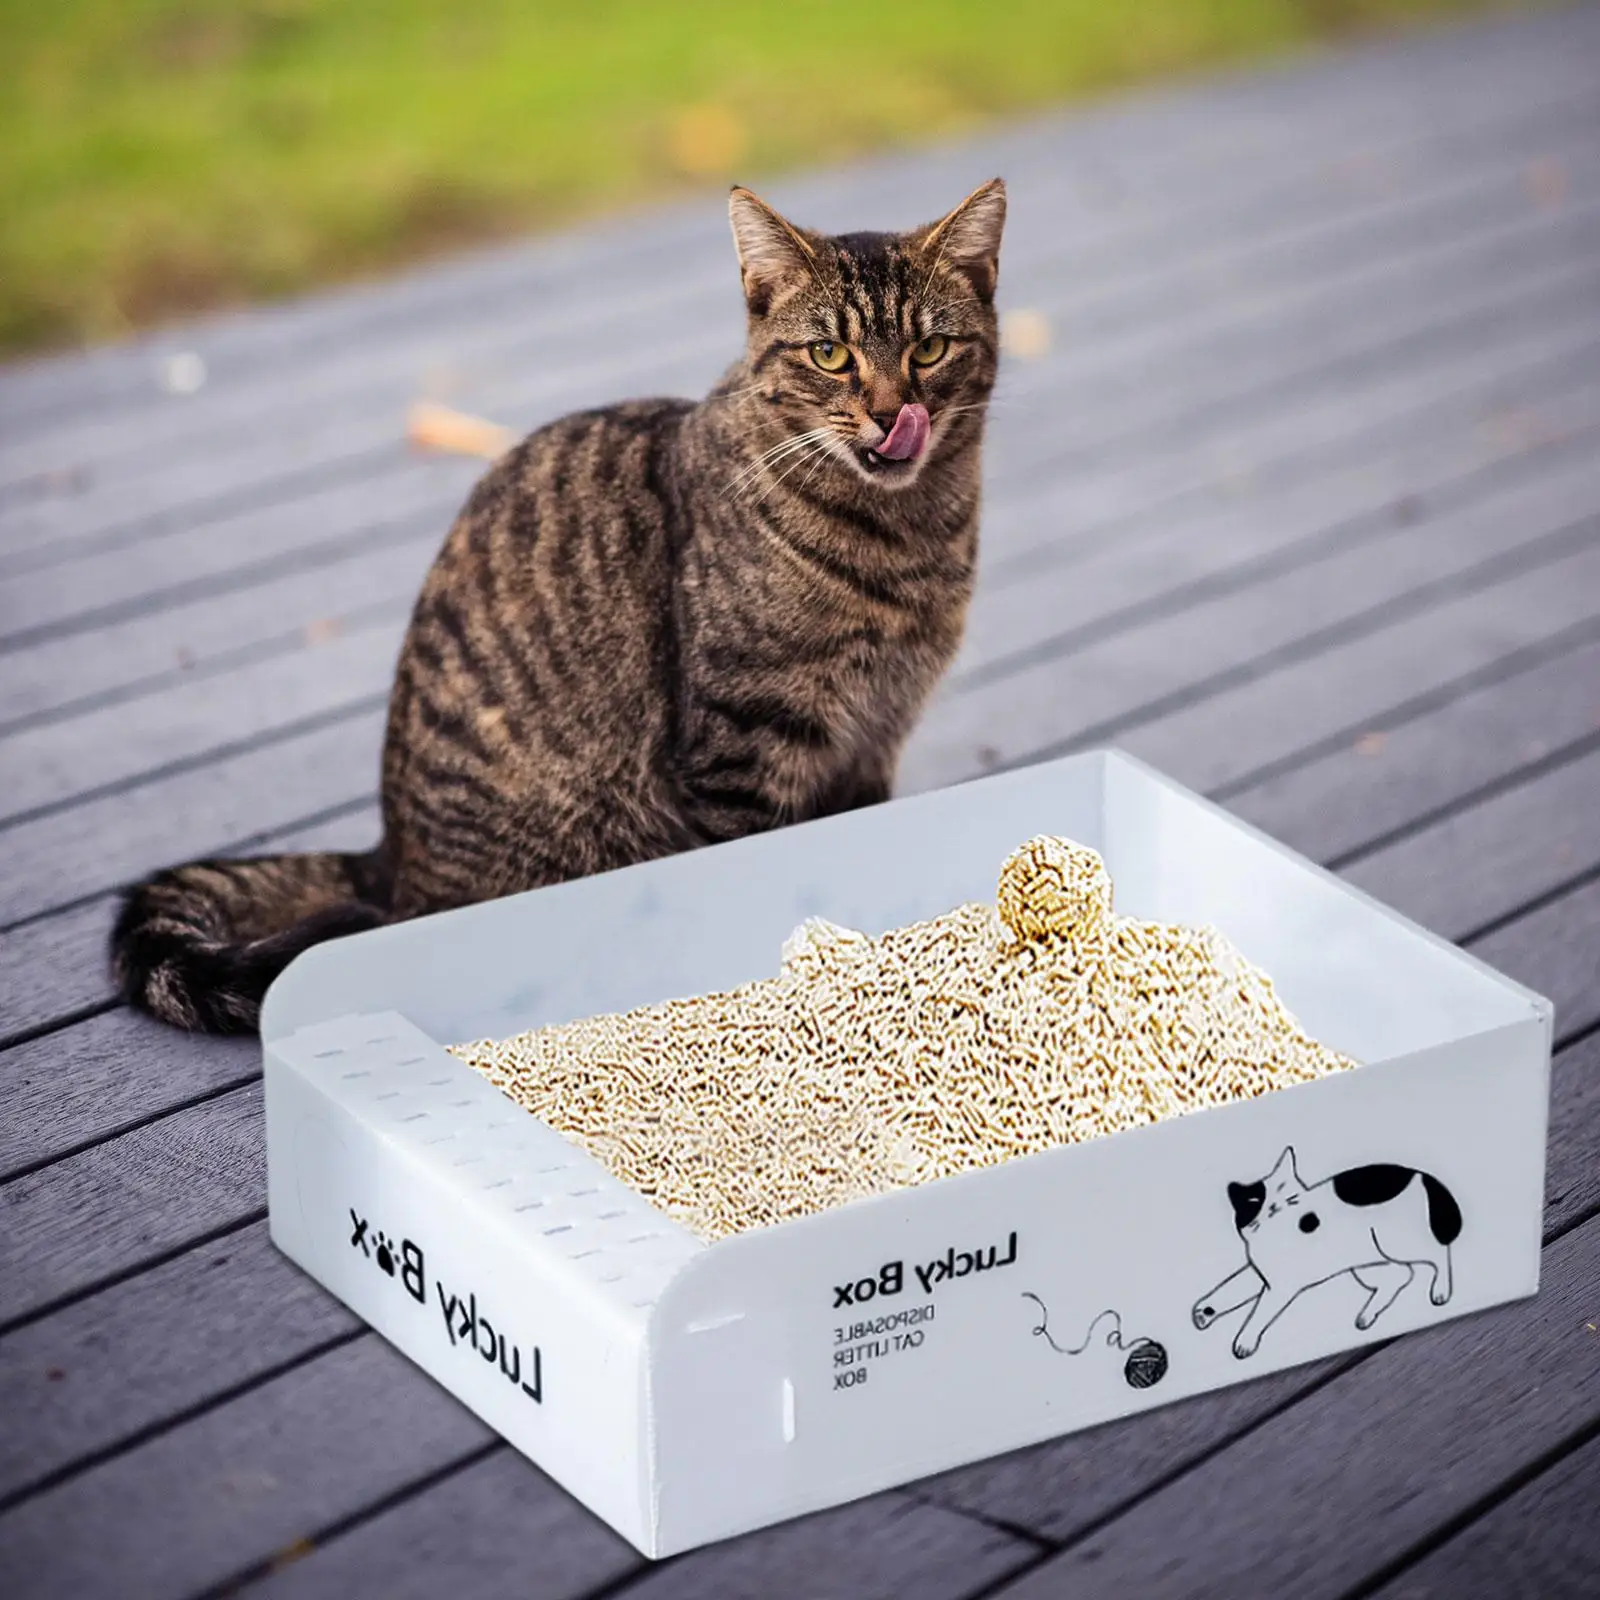 Disposable Cat Litter Box Waterproof Open Top Pet Cat Litter Box Kitten Litter Pan Litter Tray for Puppy Small Animals Bunny